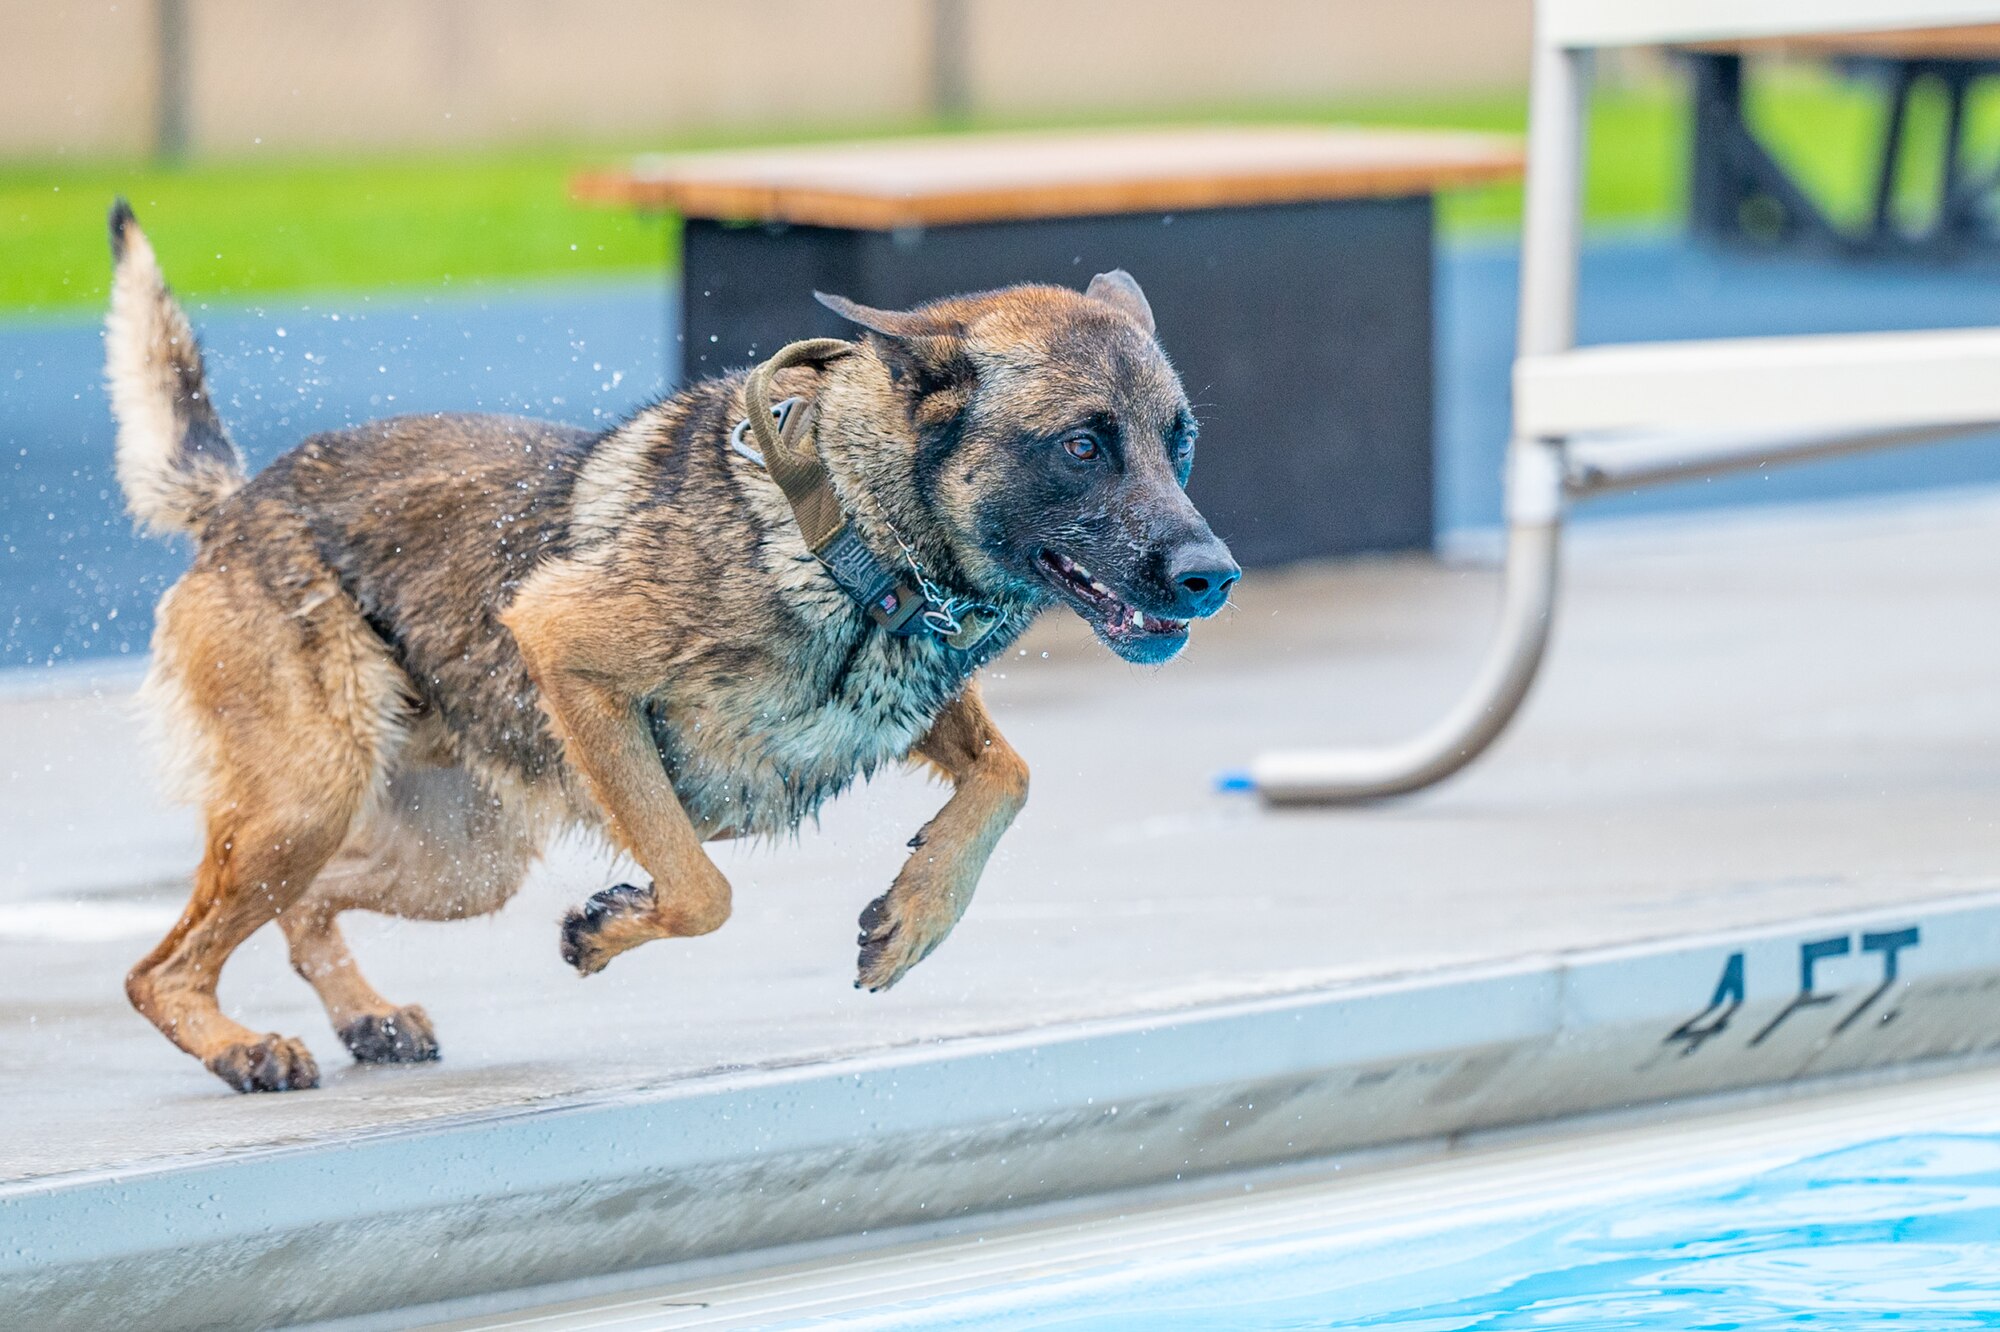 Bond, 341st Security Forces Squadron military working dog, prepares to jump into the base pool Aug. 24, 2022, at Malmstrom Air Force Base, Mont. Malmstrom’s MWD’s consist of German Shepards and Belgian Malinois. These canines’ athleticism and overall adaptability are essential to protecting the 341st SFS’s mission of base-side defense. (U.S. Air Force photo by Airman 1st Class Mary Bowers)